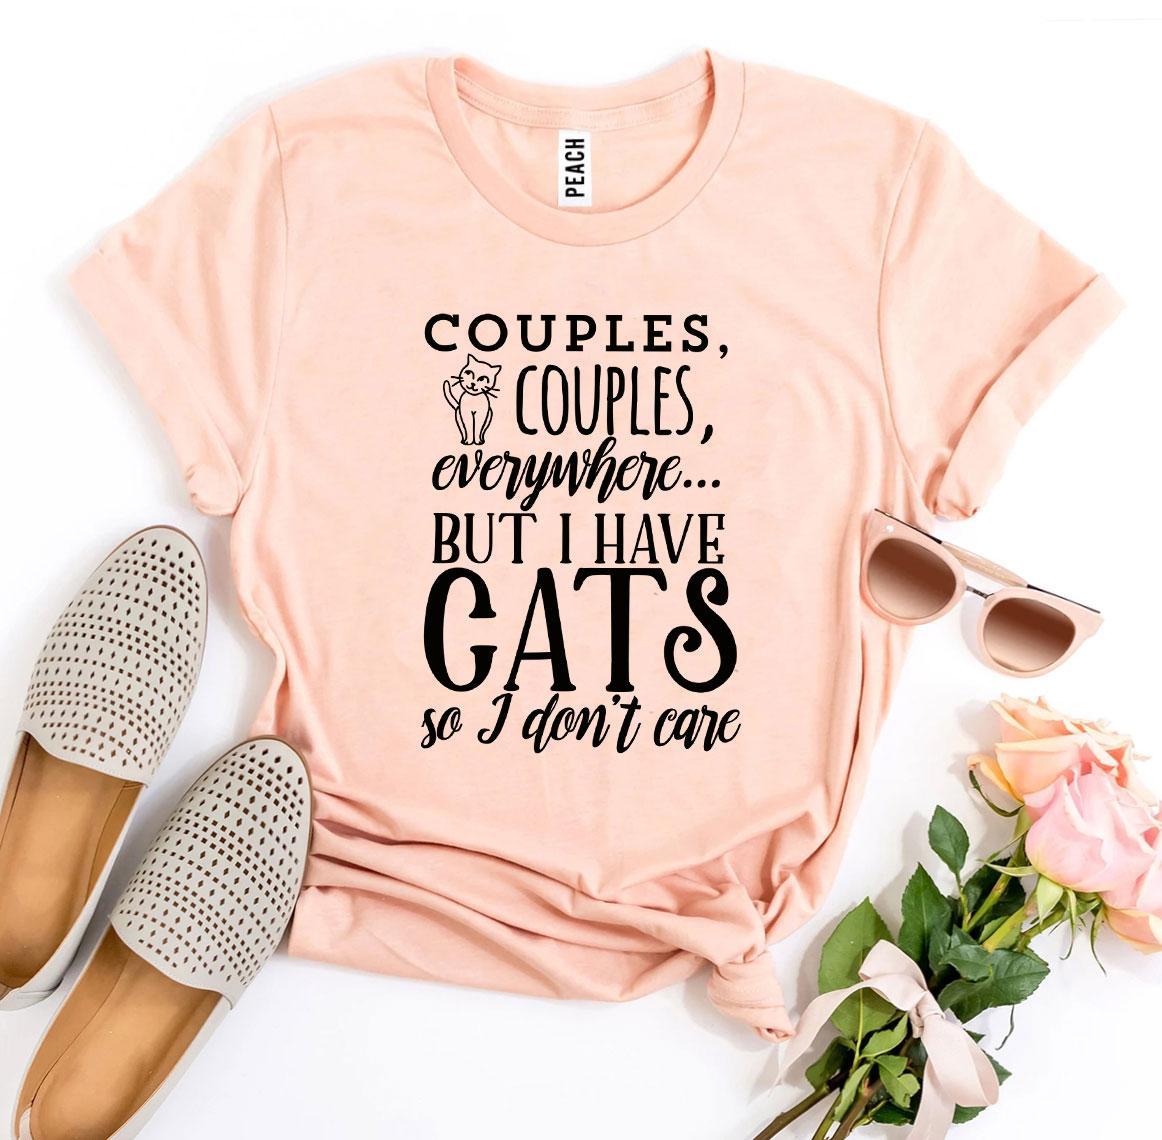 Couples, Couples, Everywhere T-Shirt - Furr Baby Gifts